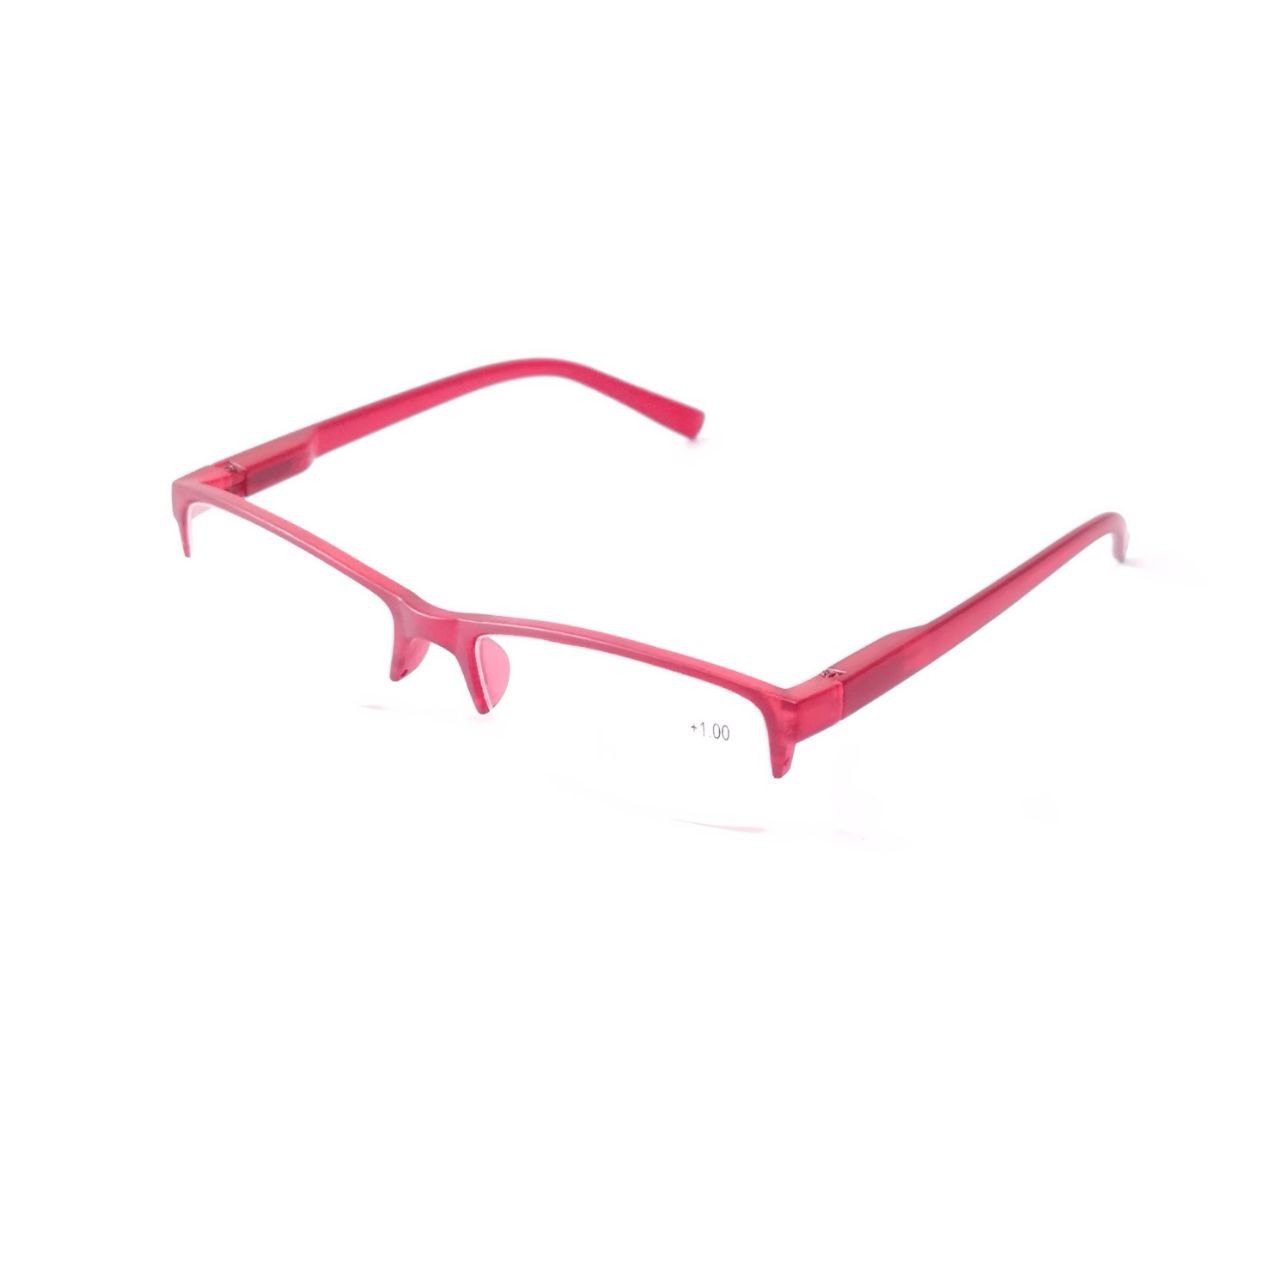 Stylish Supra Reading Glasses in Red Color for Men and Women with +1.00 Power